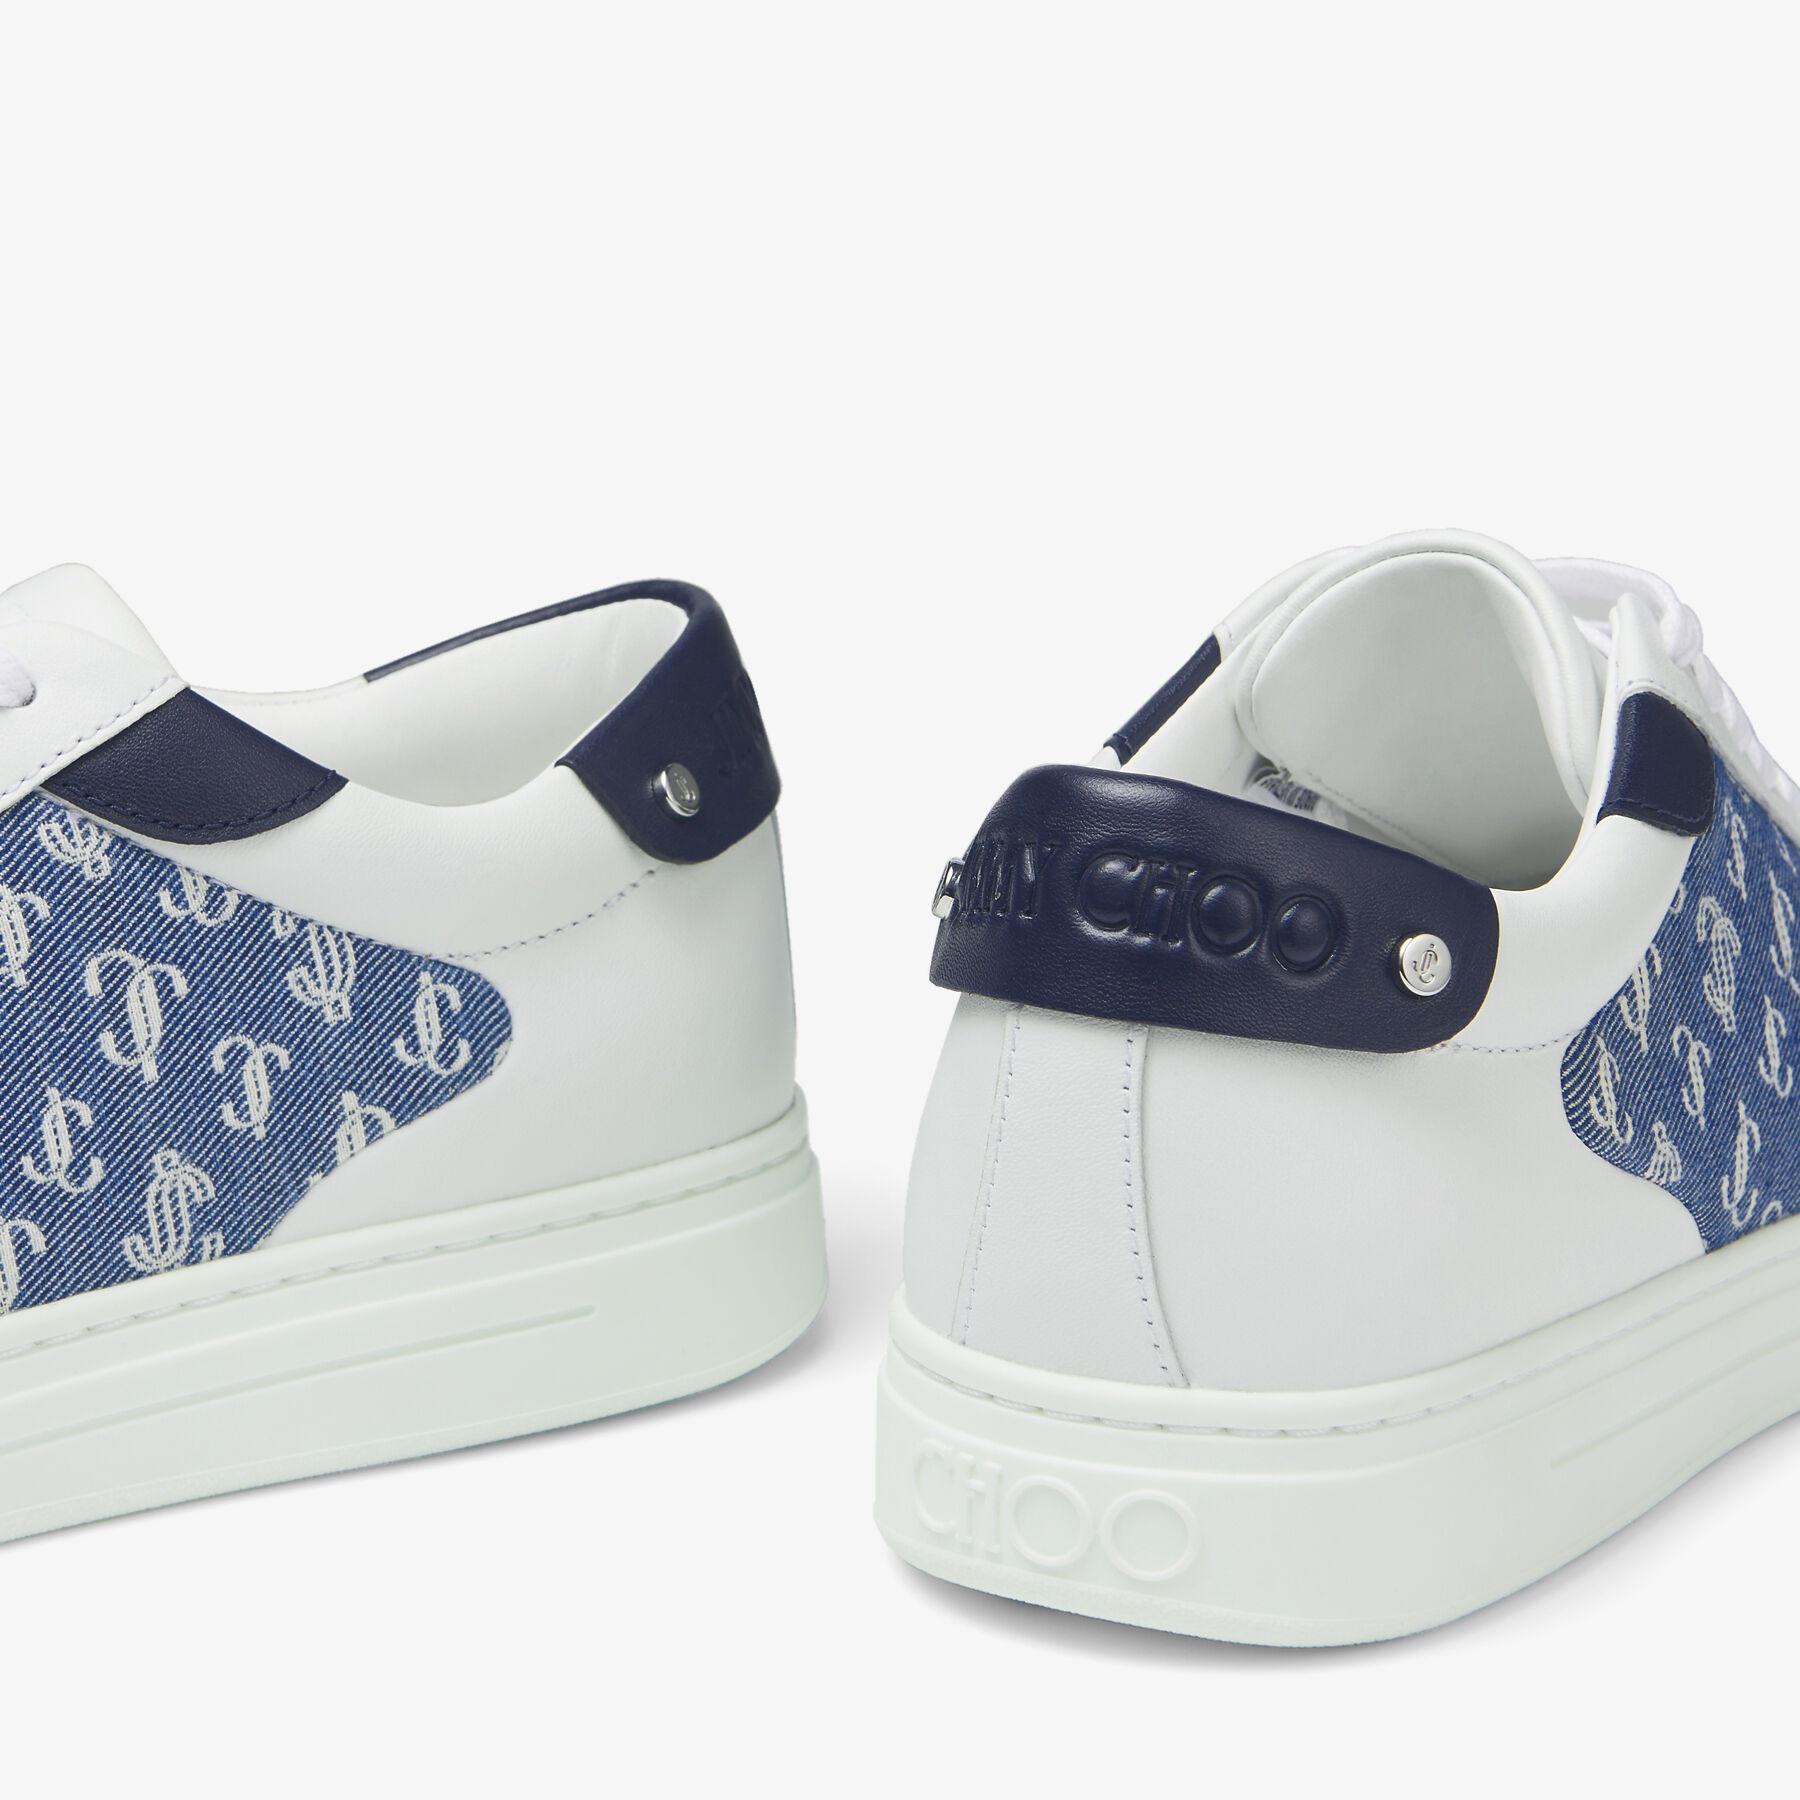 Rome/f
White Leather and Denim JC Monogram Pattern Low-Top Trainers - 4